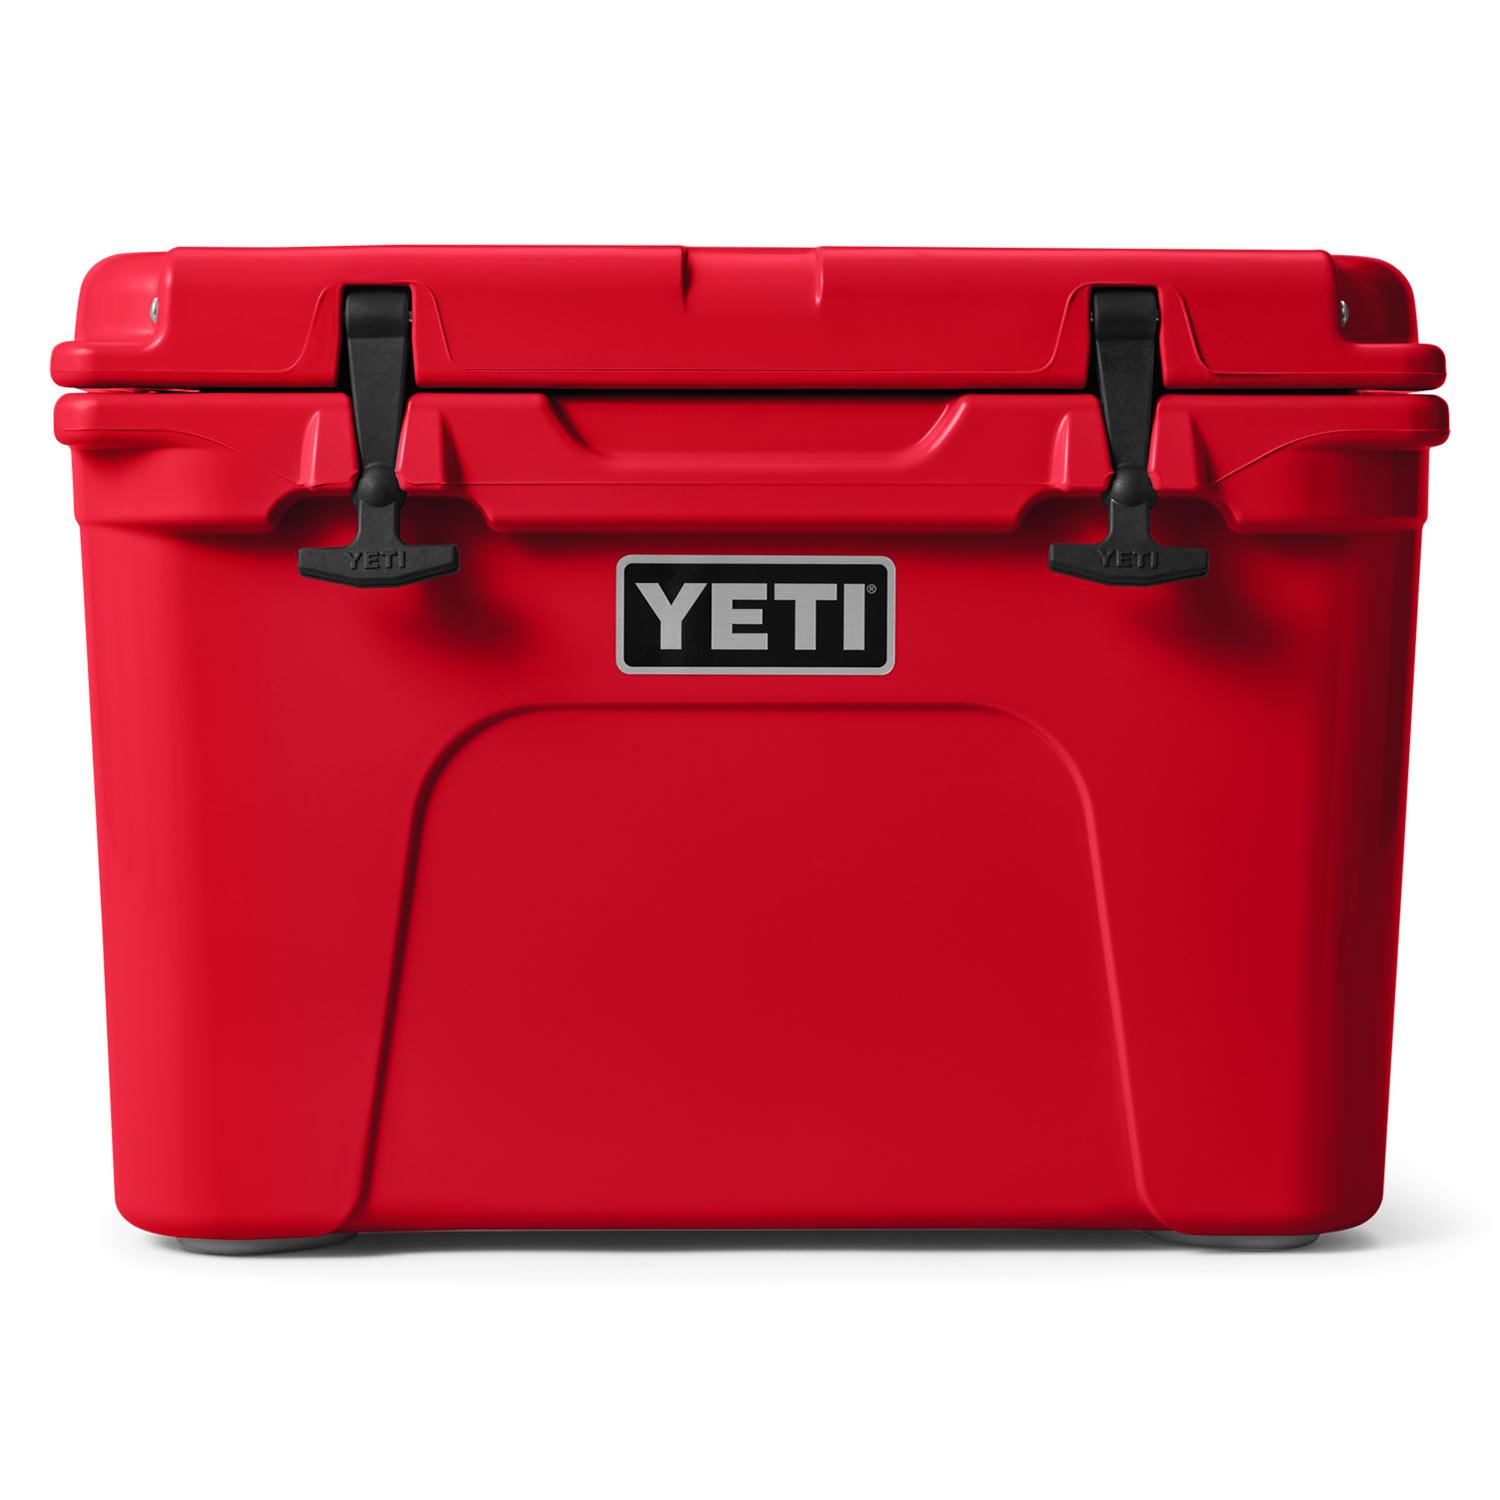 Rotomolded Cooler Fishing Rod Holder Fits Yeti and Other Brands